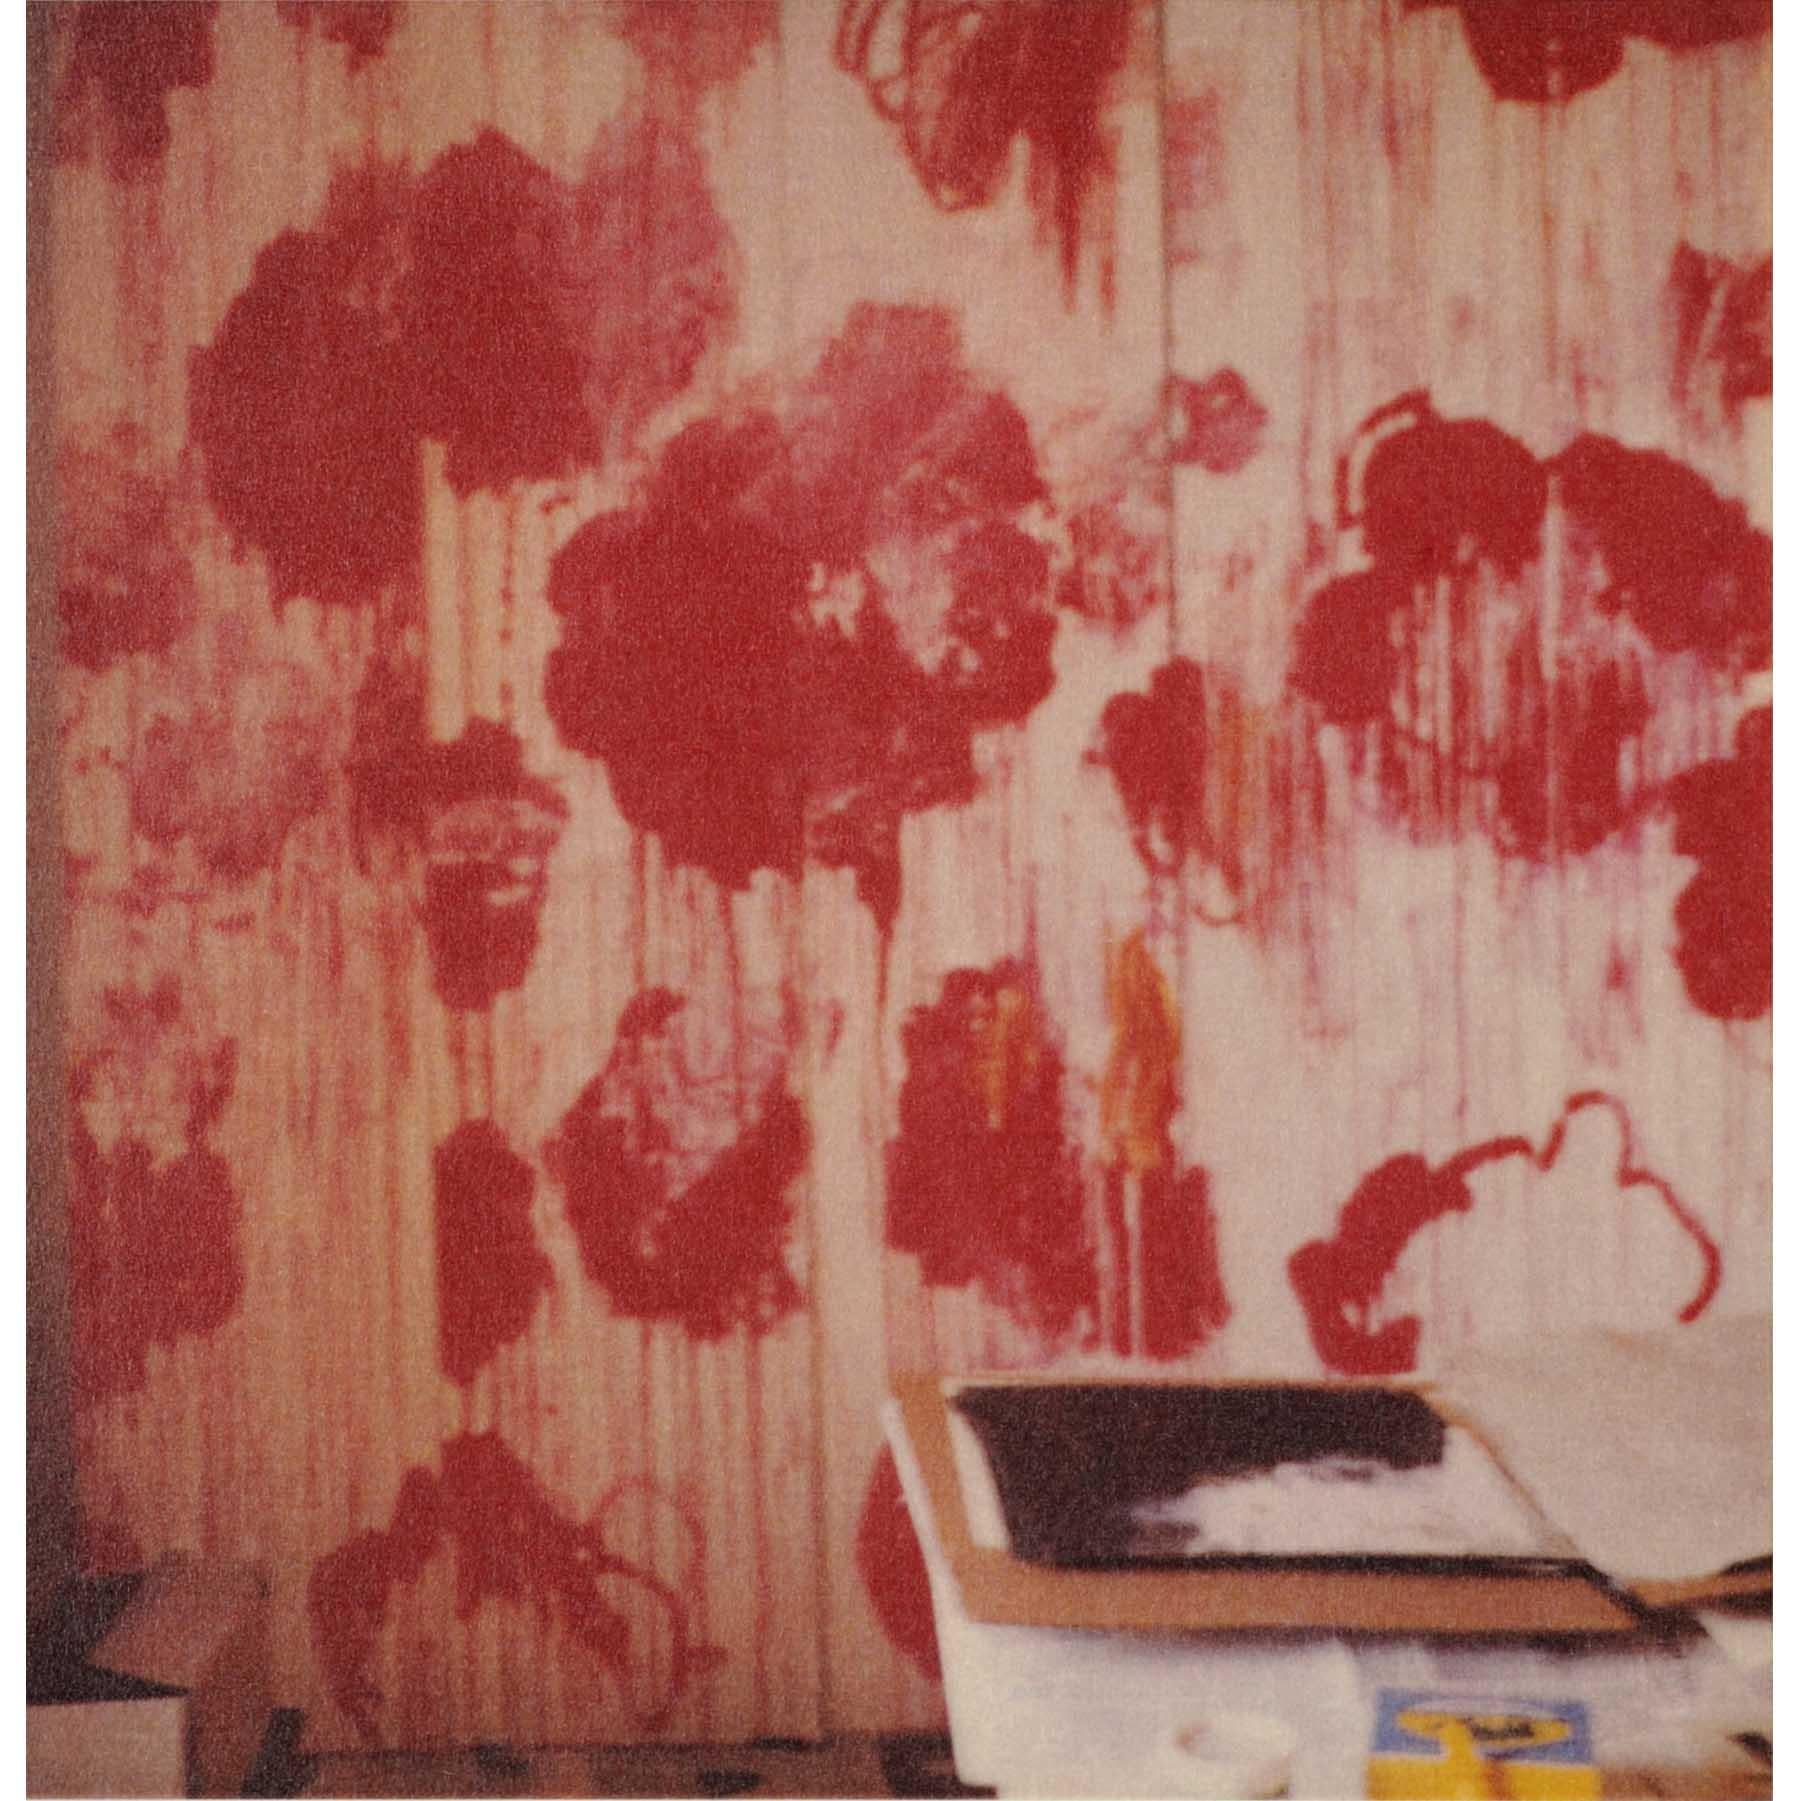 Unfinished Painting (Gaeta) - Contemporary, 21st Century, Dry-print, Edition - Photorealist Print by Cy Twombly